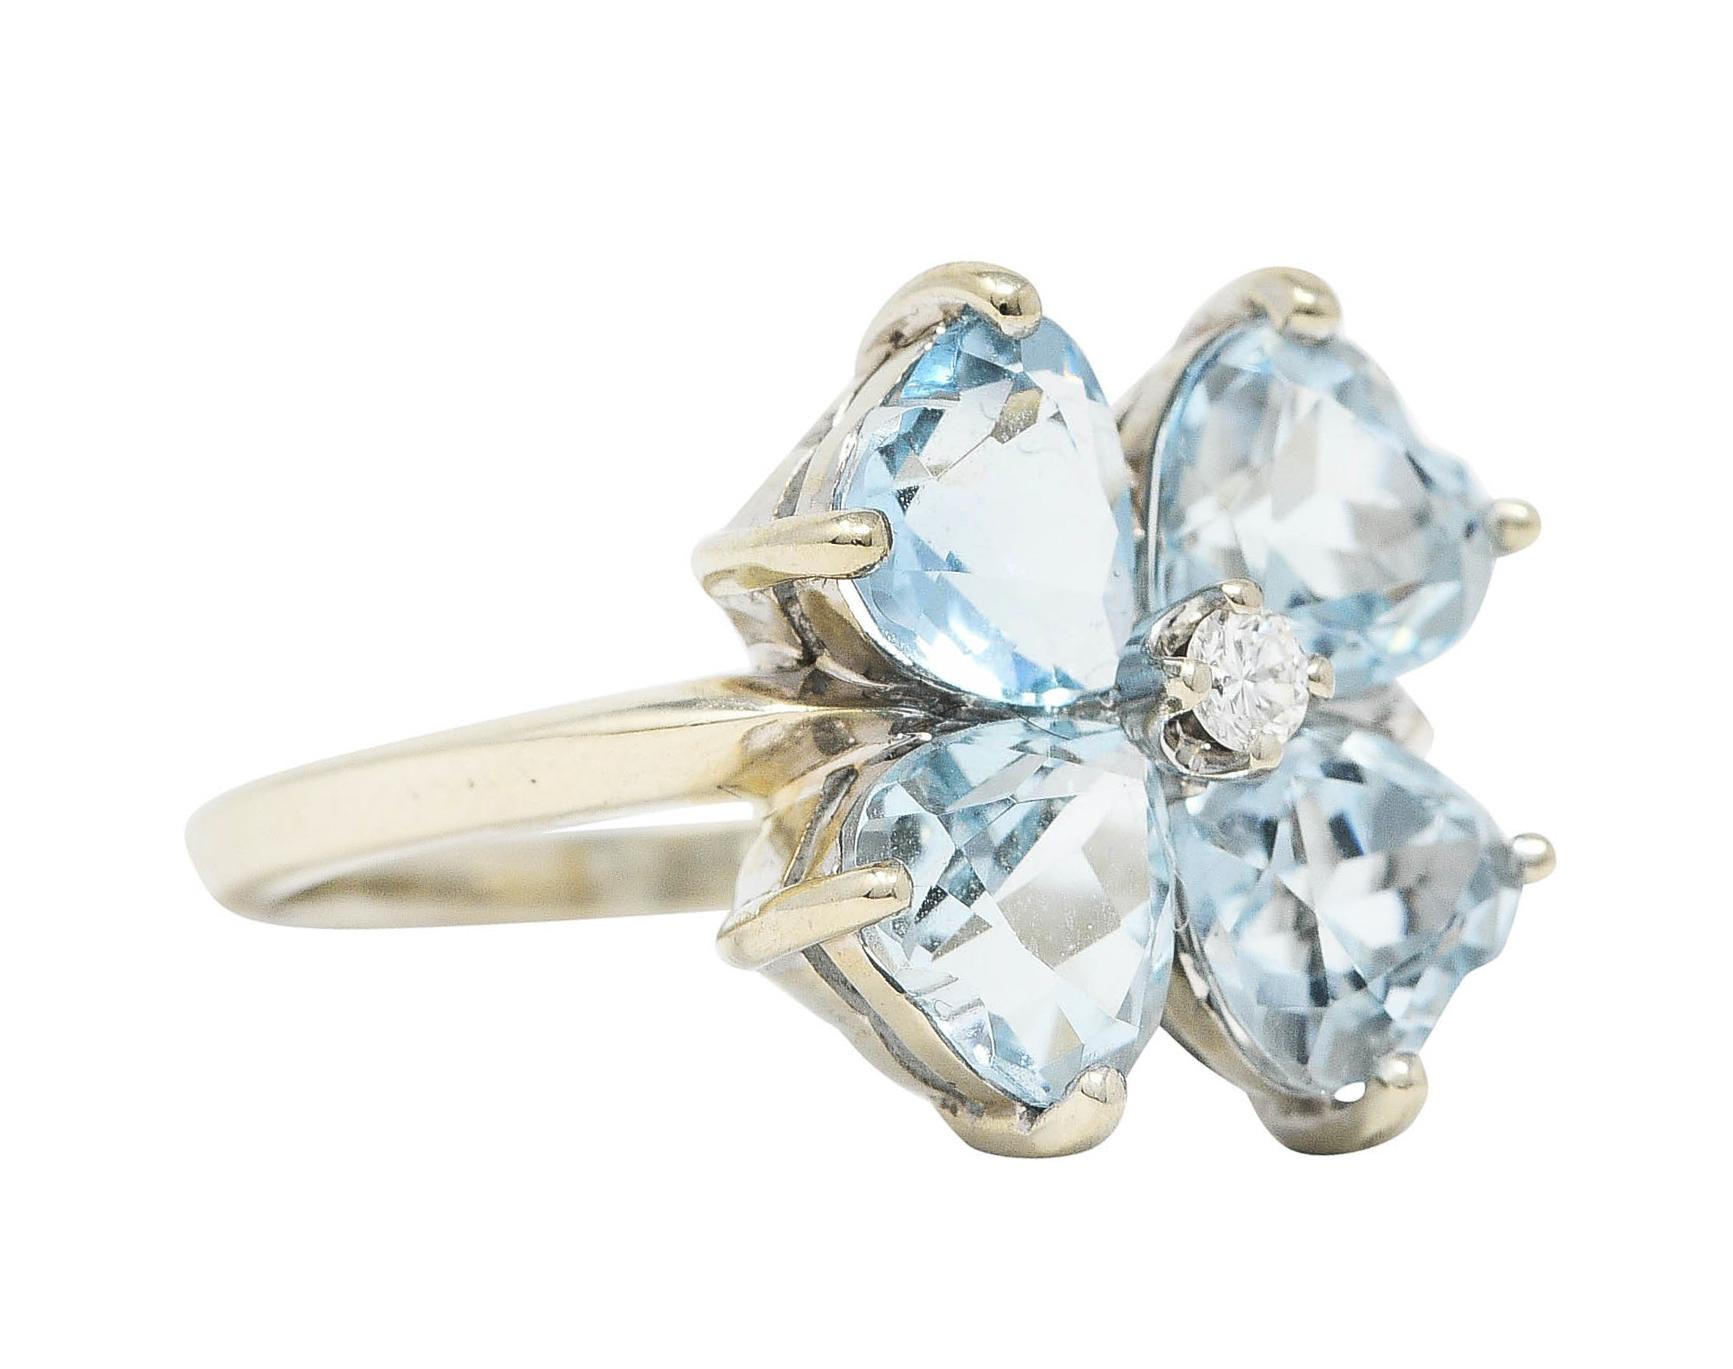 Designed as floral head consisting of four heart cut aquamarine petals

Transparent and slightly greenish blue in color with light saturation

Centering a round brilliant cut diamond weighing approximately 0.04 carat - eye clean and bright

Stamped